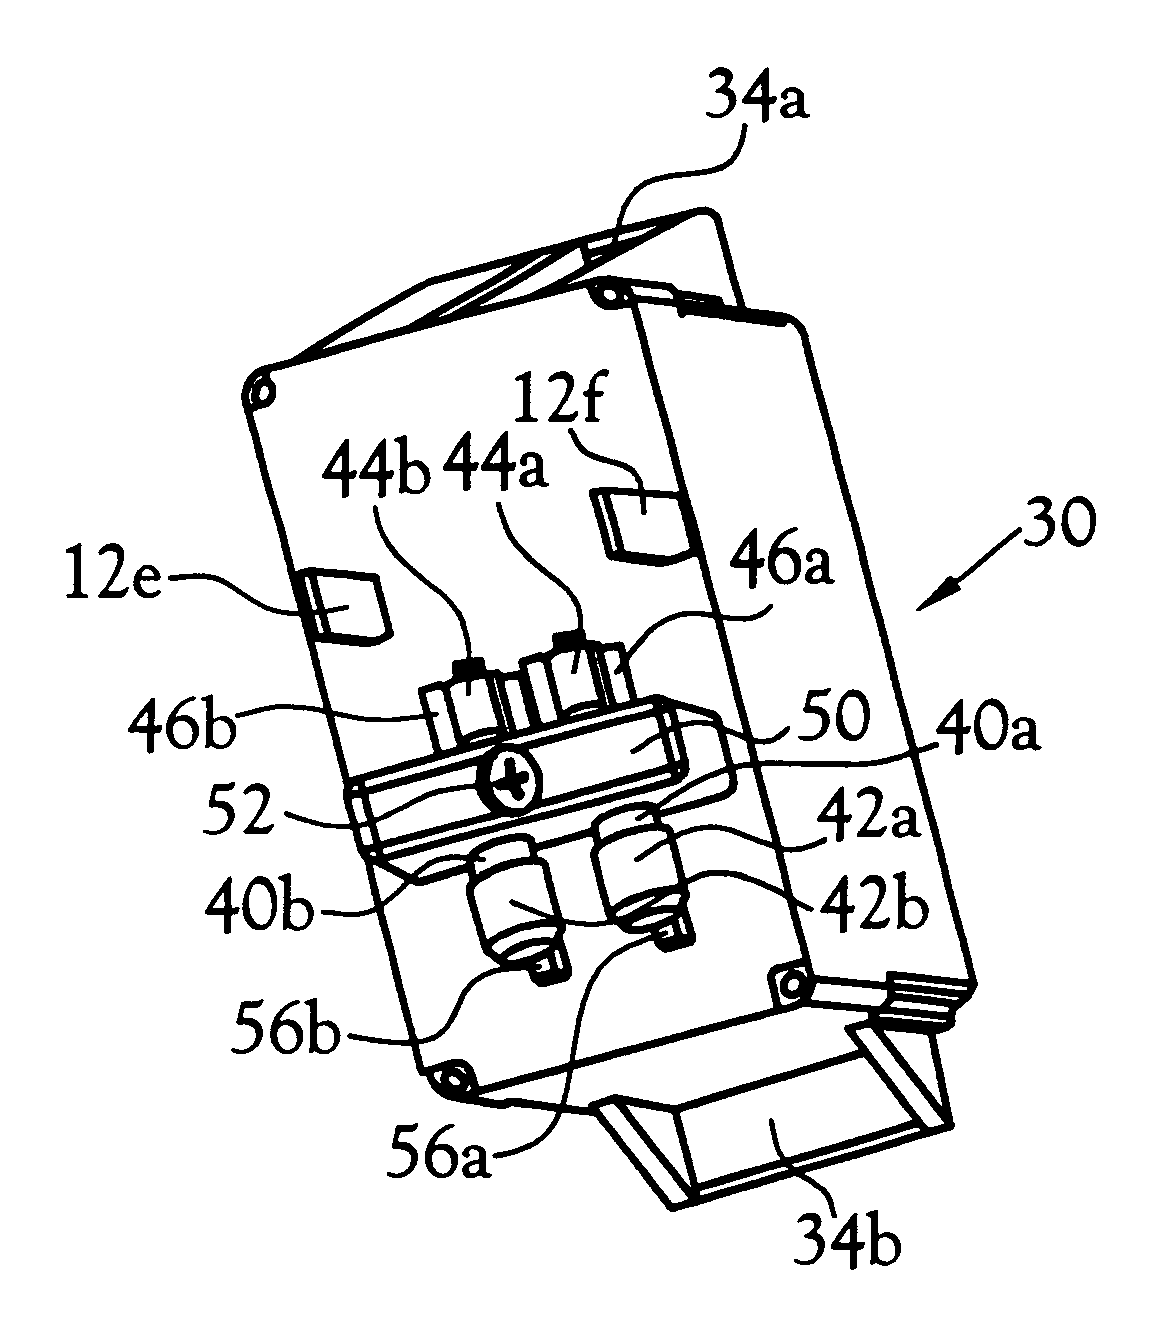 Fuse stab connector for electronic modules